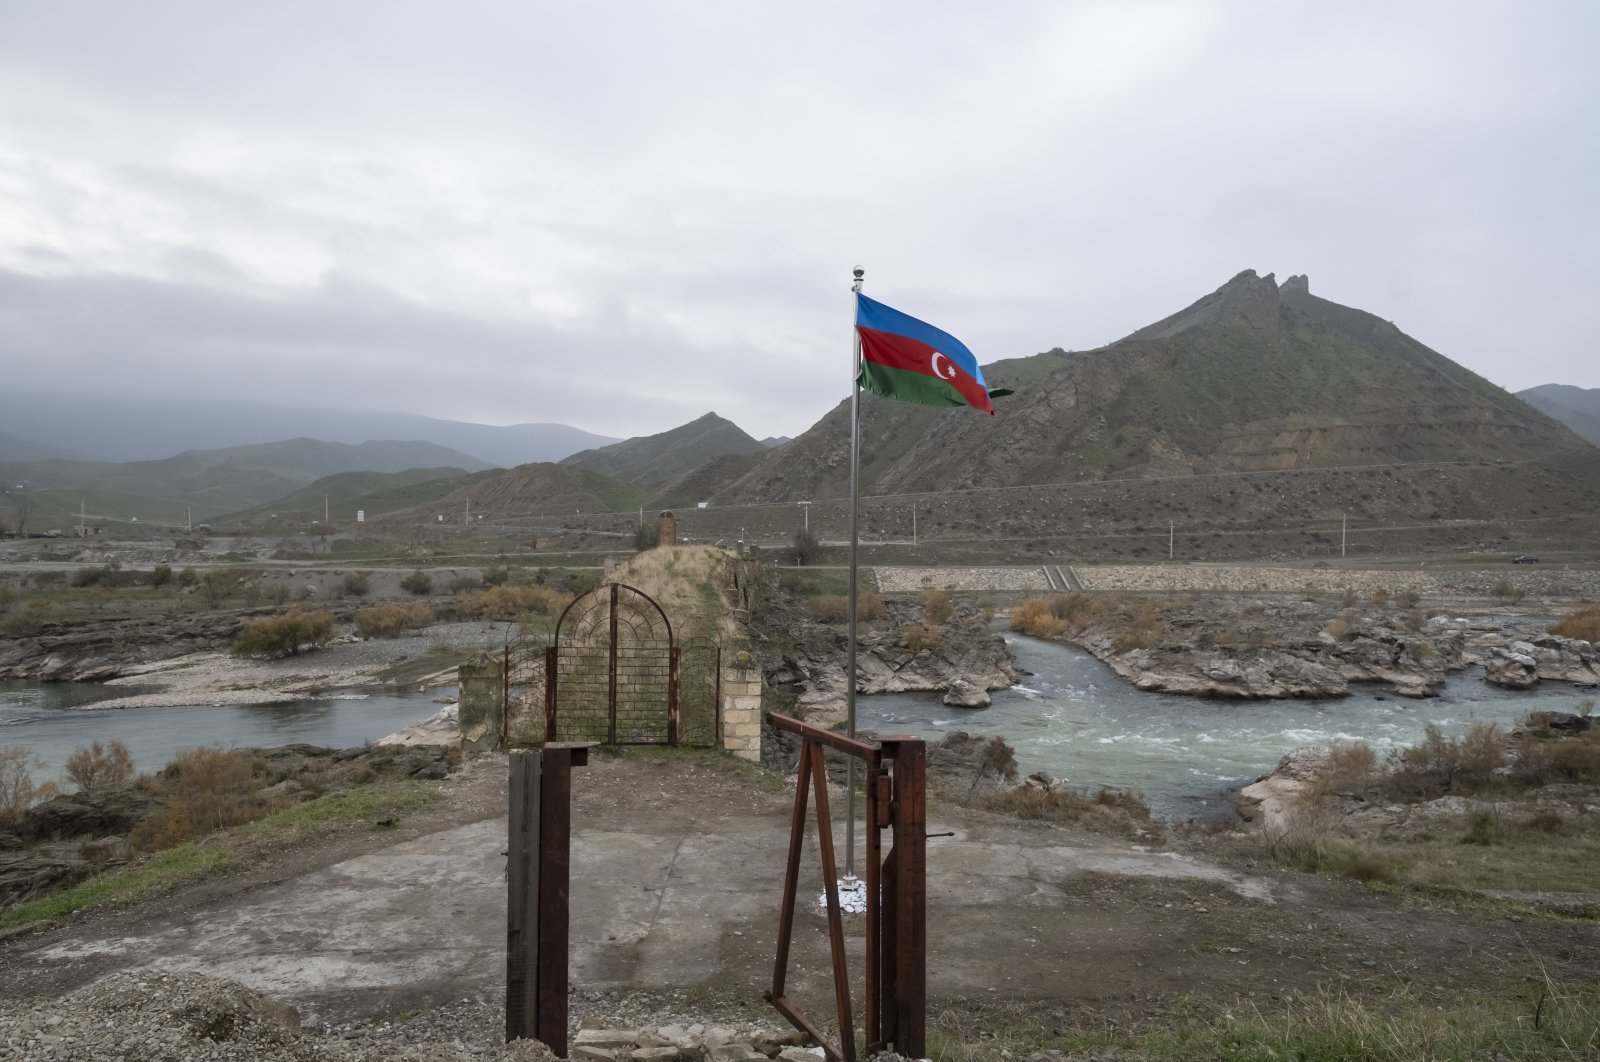 An Azerbaijani national flag flies next to the 13th century Khodaafarin Arch Bridge connecting the northern and southern banks of the Aras River located at the border of Azerbaijan and Iran, Jabrayil, Azerbaijan, Dec. 15, 2020. (Getty Images) 